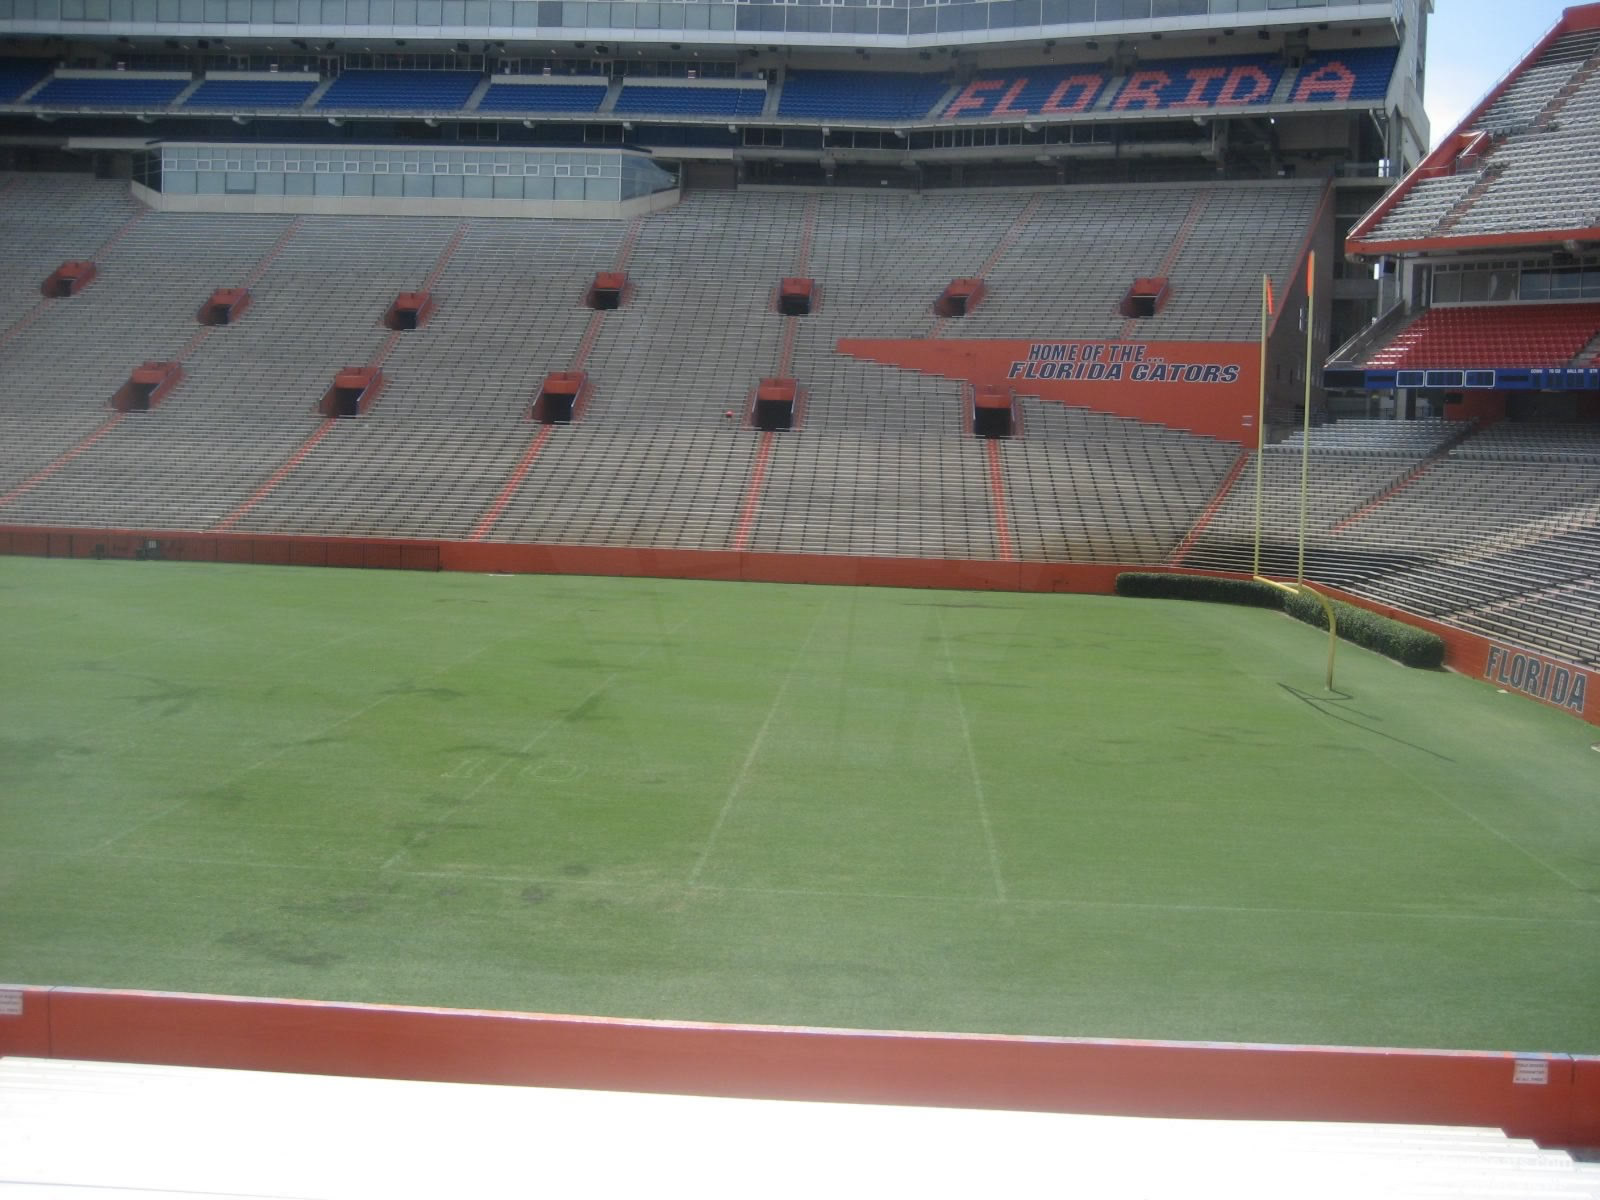 section 30, row 22 seat view  - ben hill griffin stadium